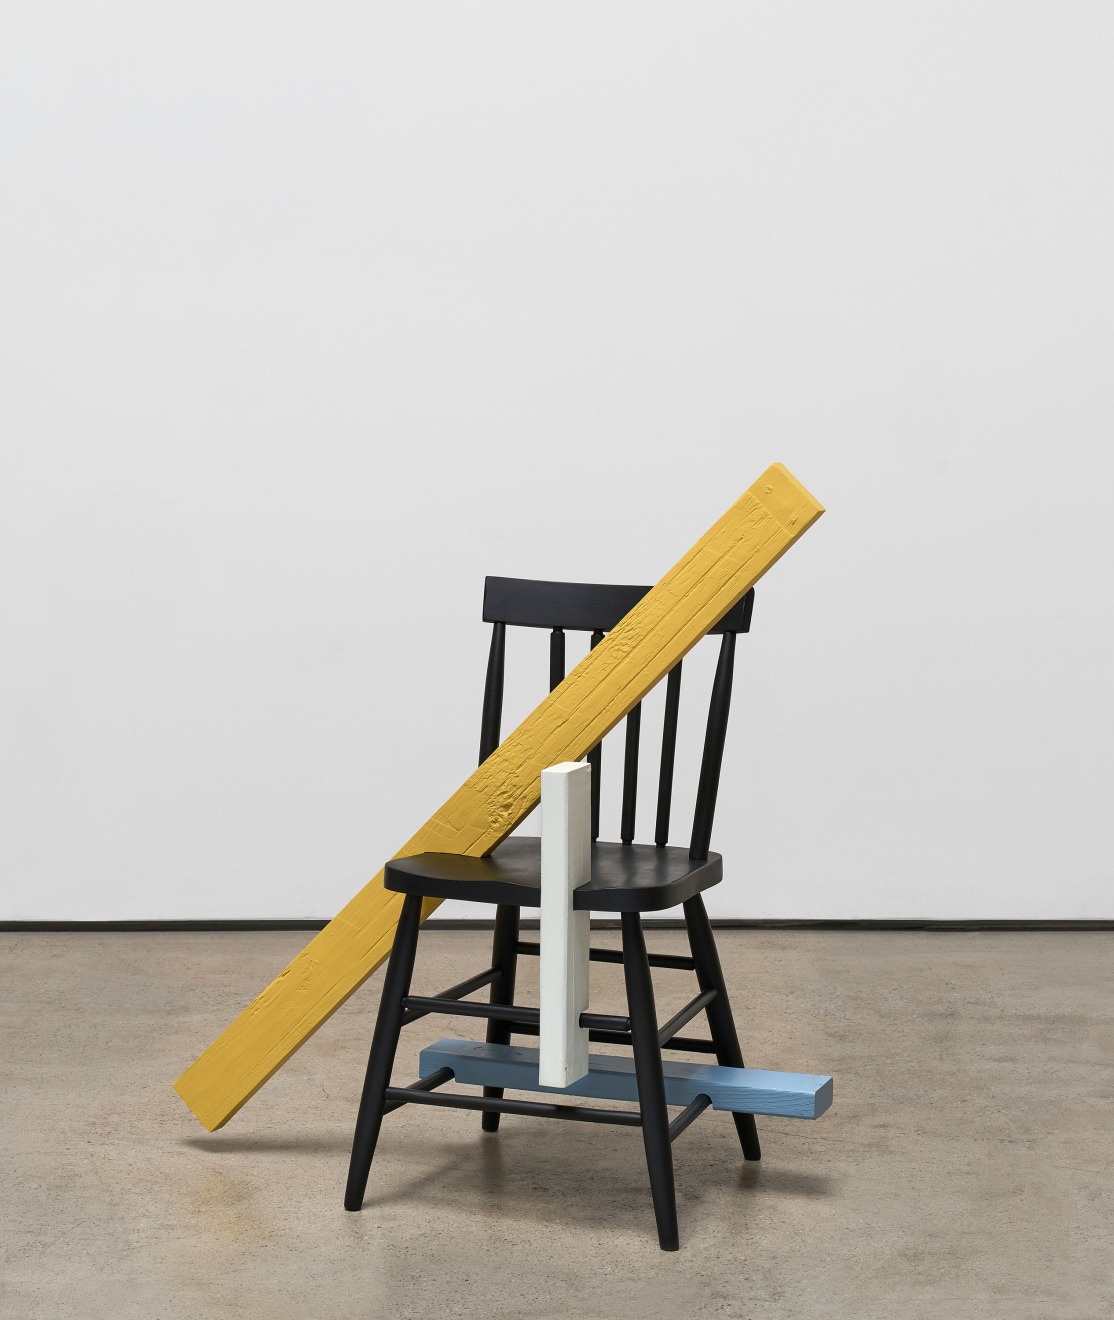 Ricky Swallow, Chair Composition #1, 2024